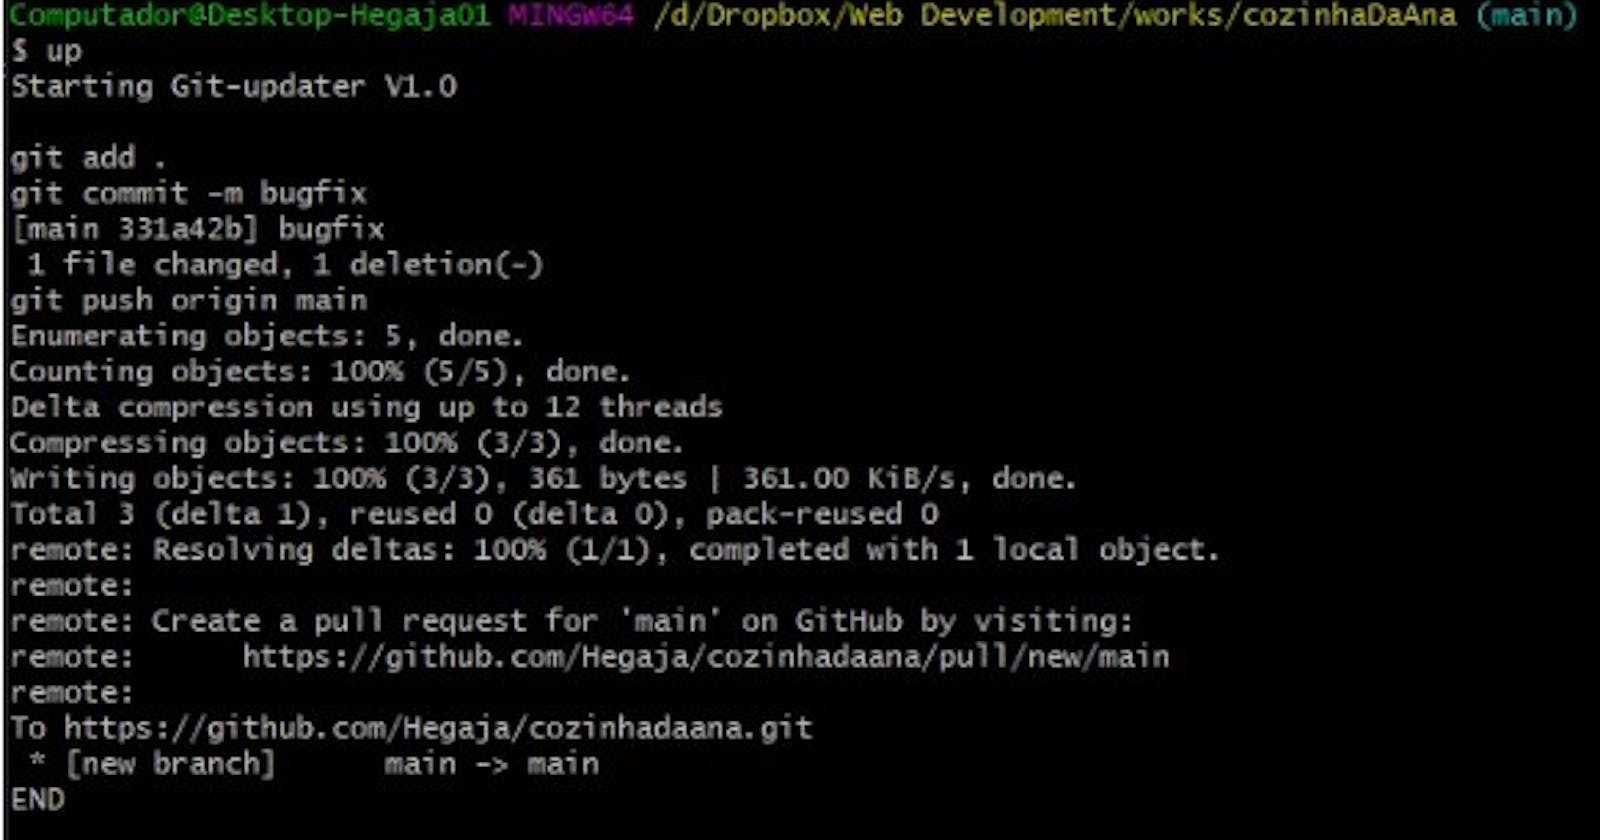 How to use bash on Windows to easily update a GIT project